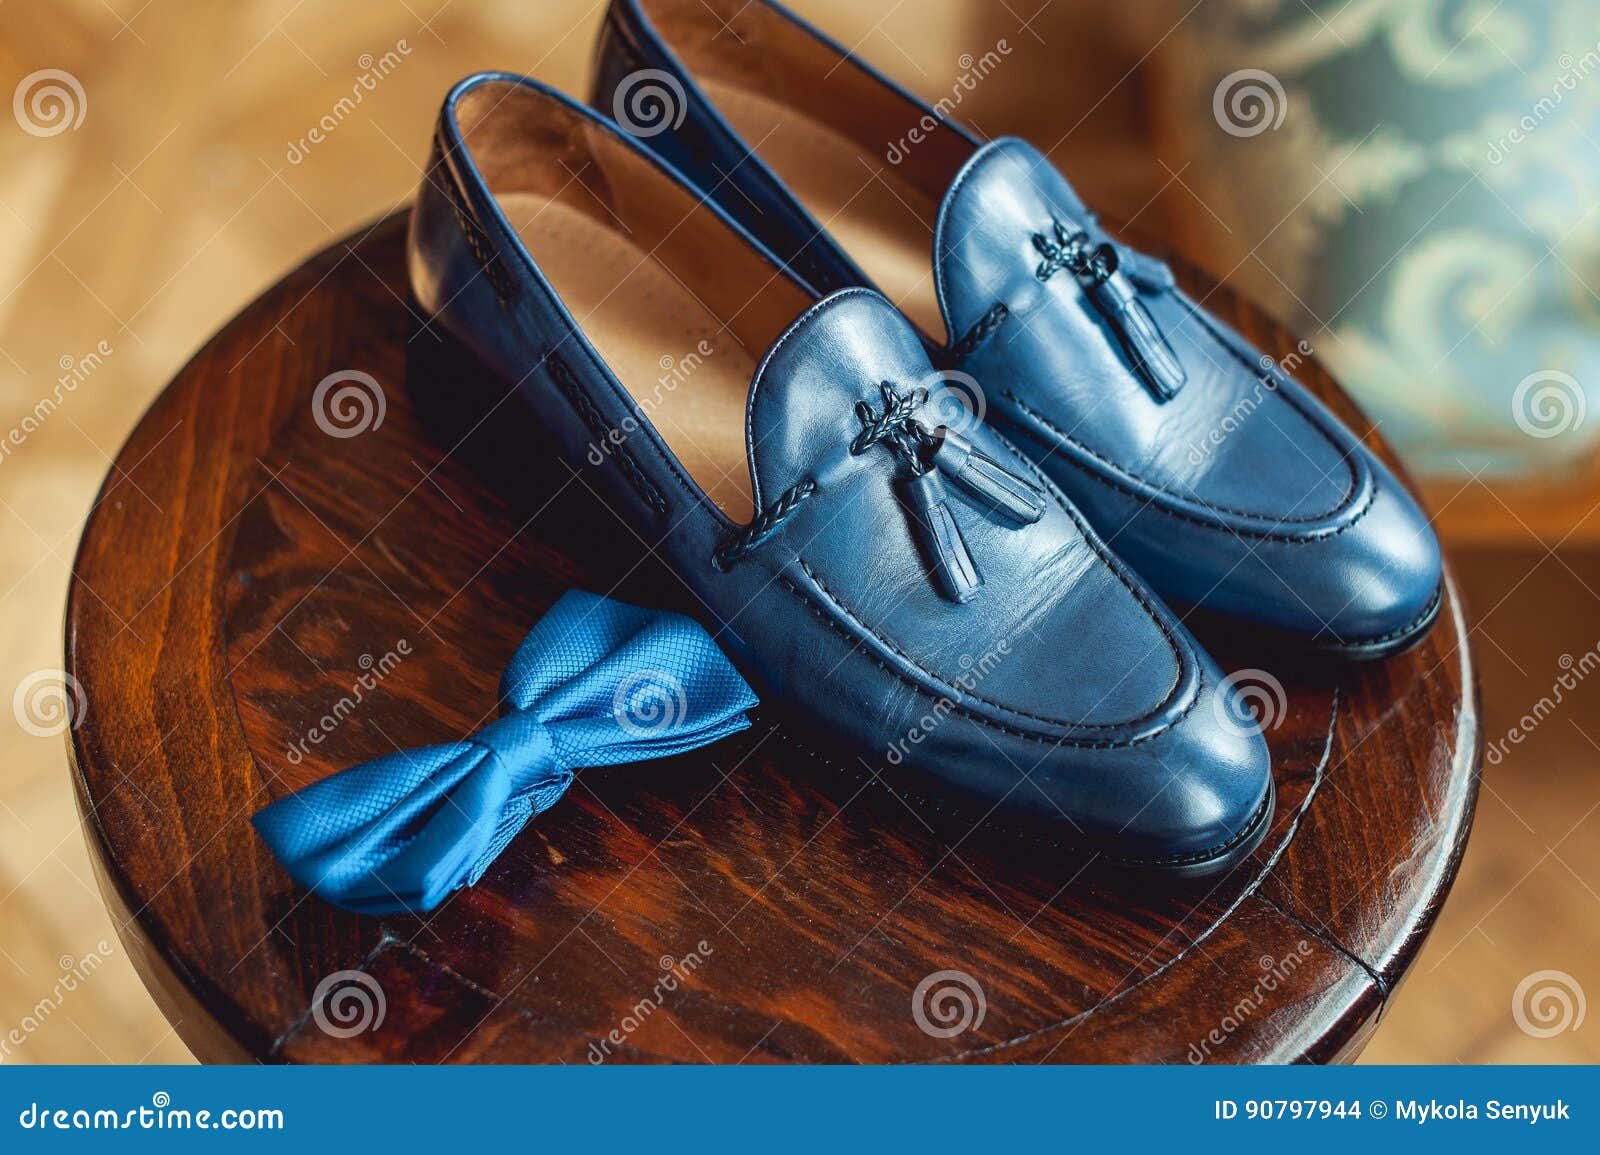 Blue Shoes and Bow Tie on a Wooden Round Stool. Accessory for Formal ...